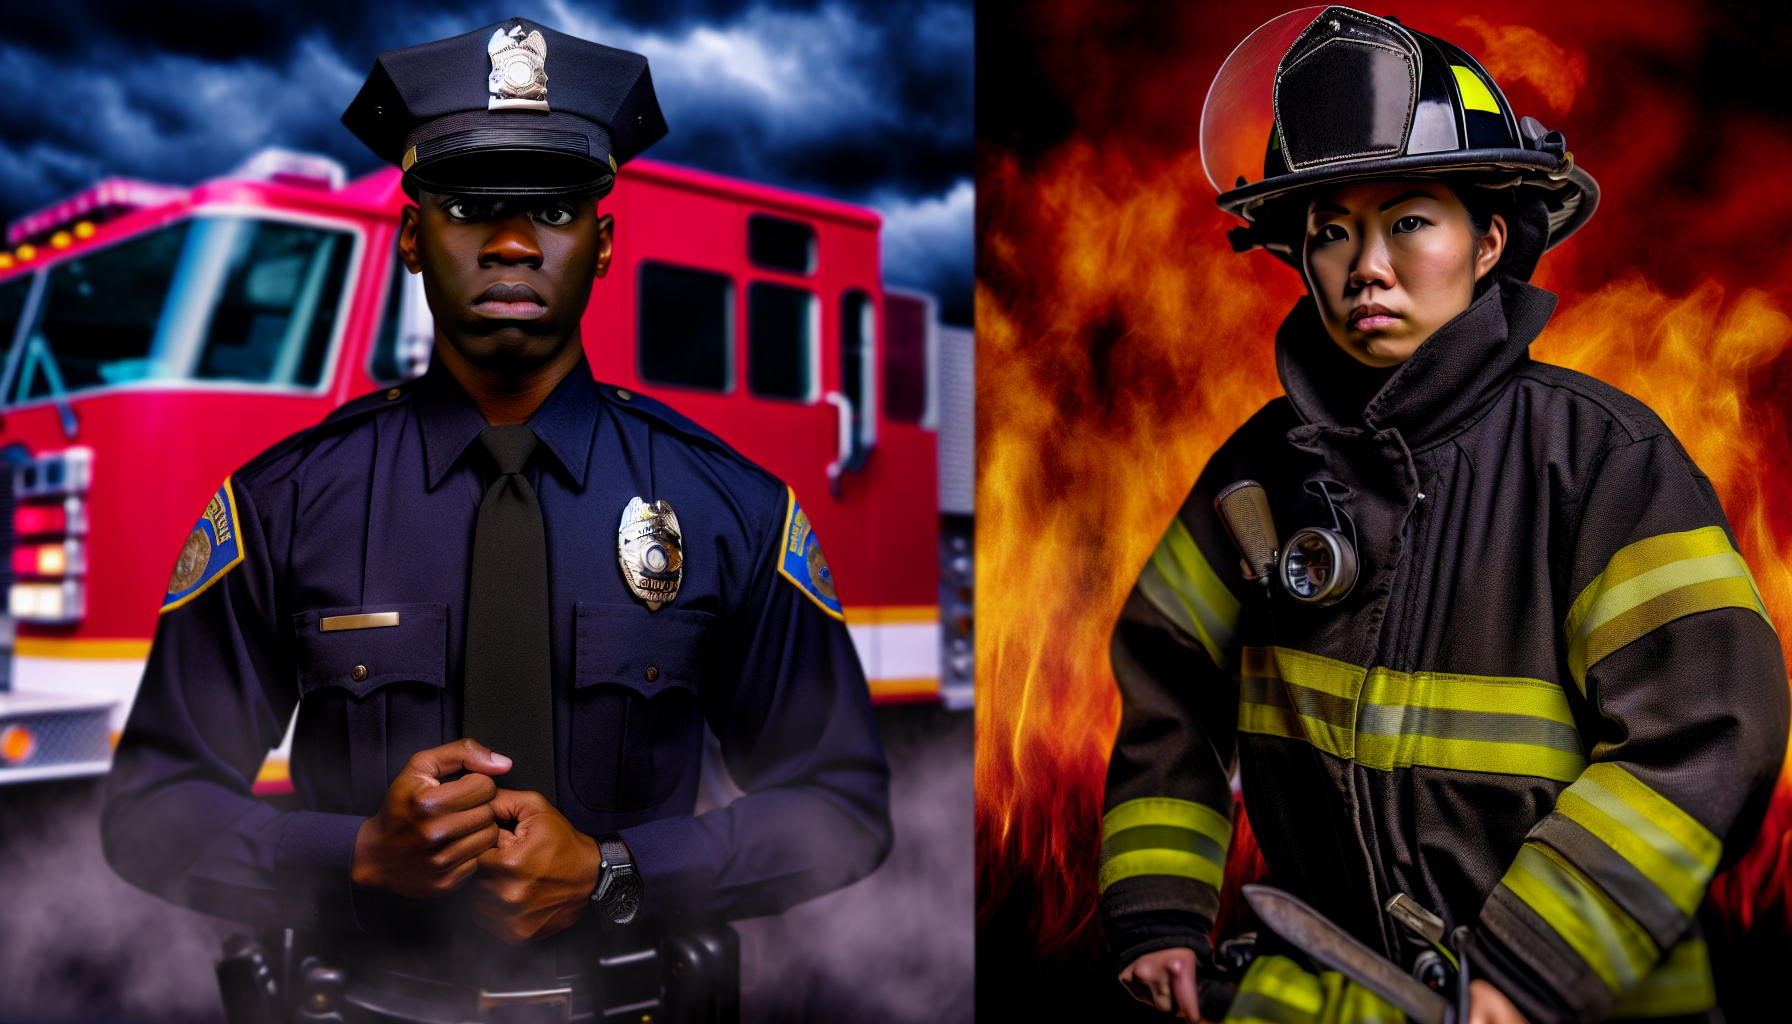 Special Considerations for Law Enforcement Officers and Firefighters